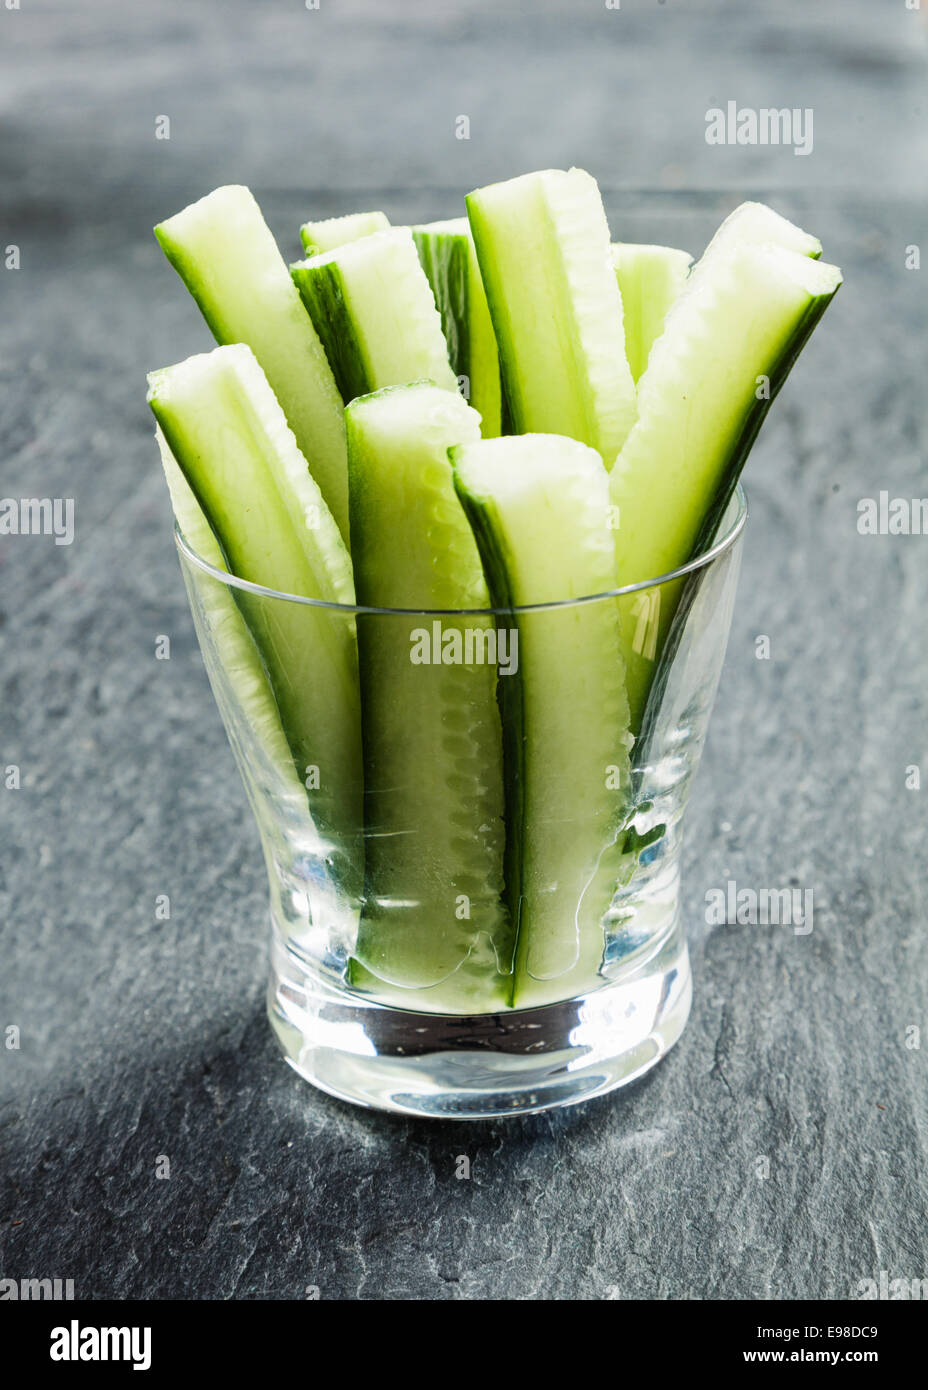 Delicious succulent cucumber crudties cut into thin strips or batons and served in a glass container on a buffet as appetizers to dip in a savory sauce Stock Photo